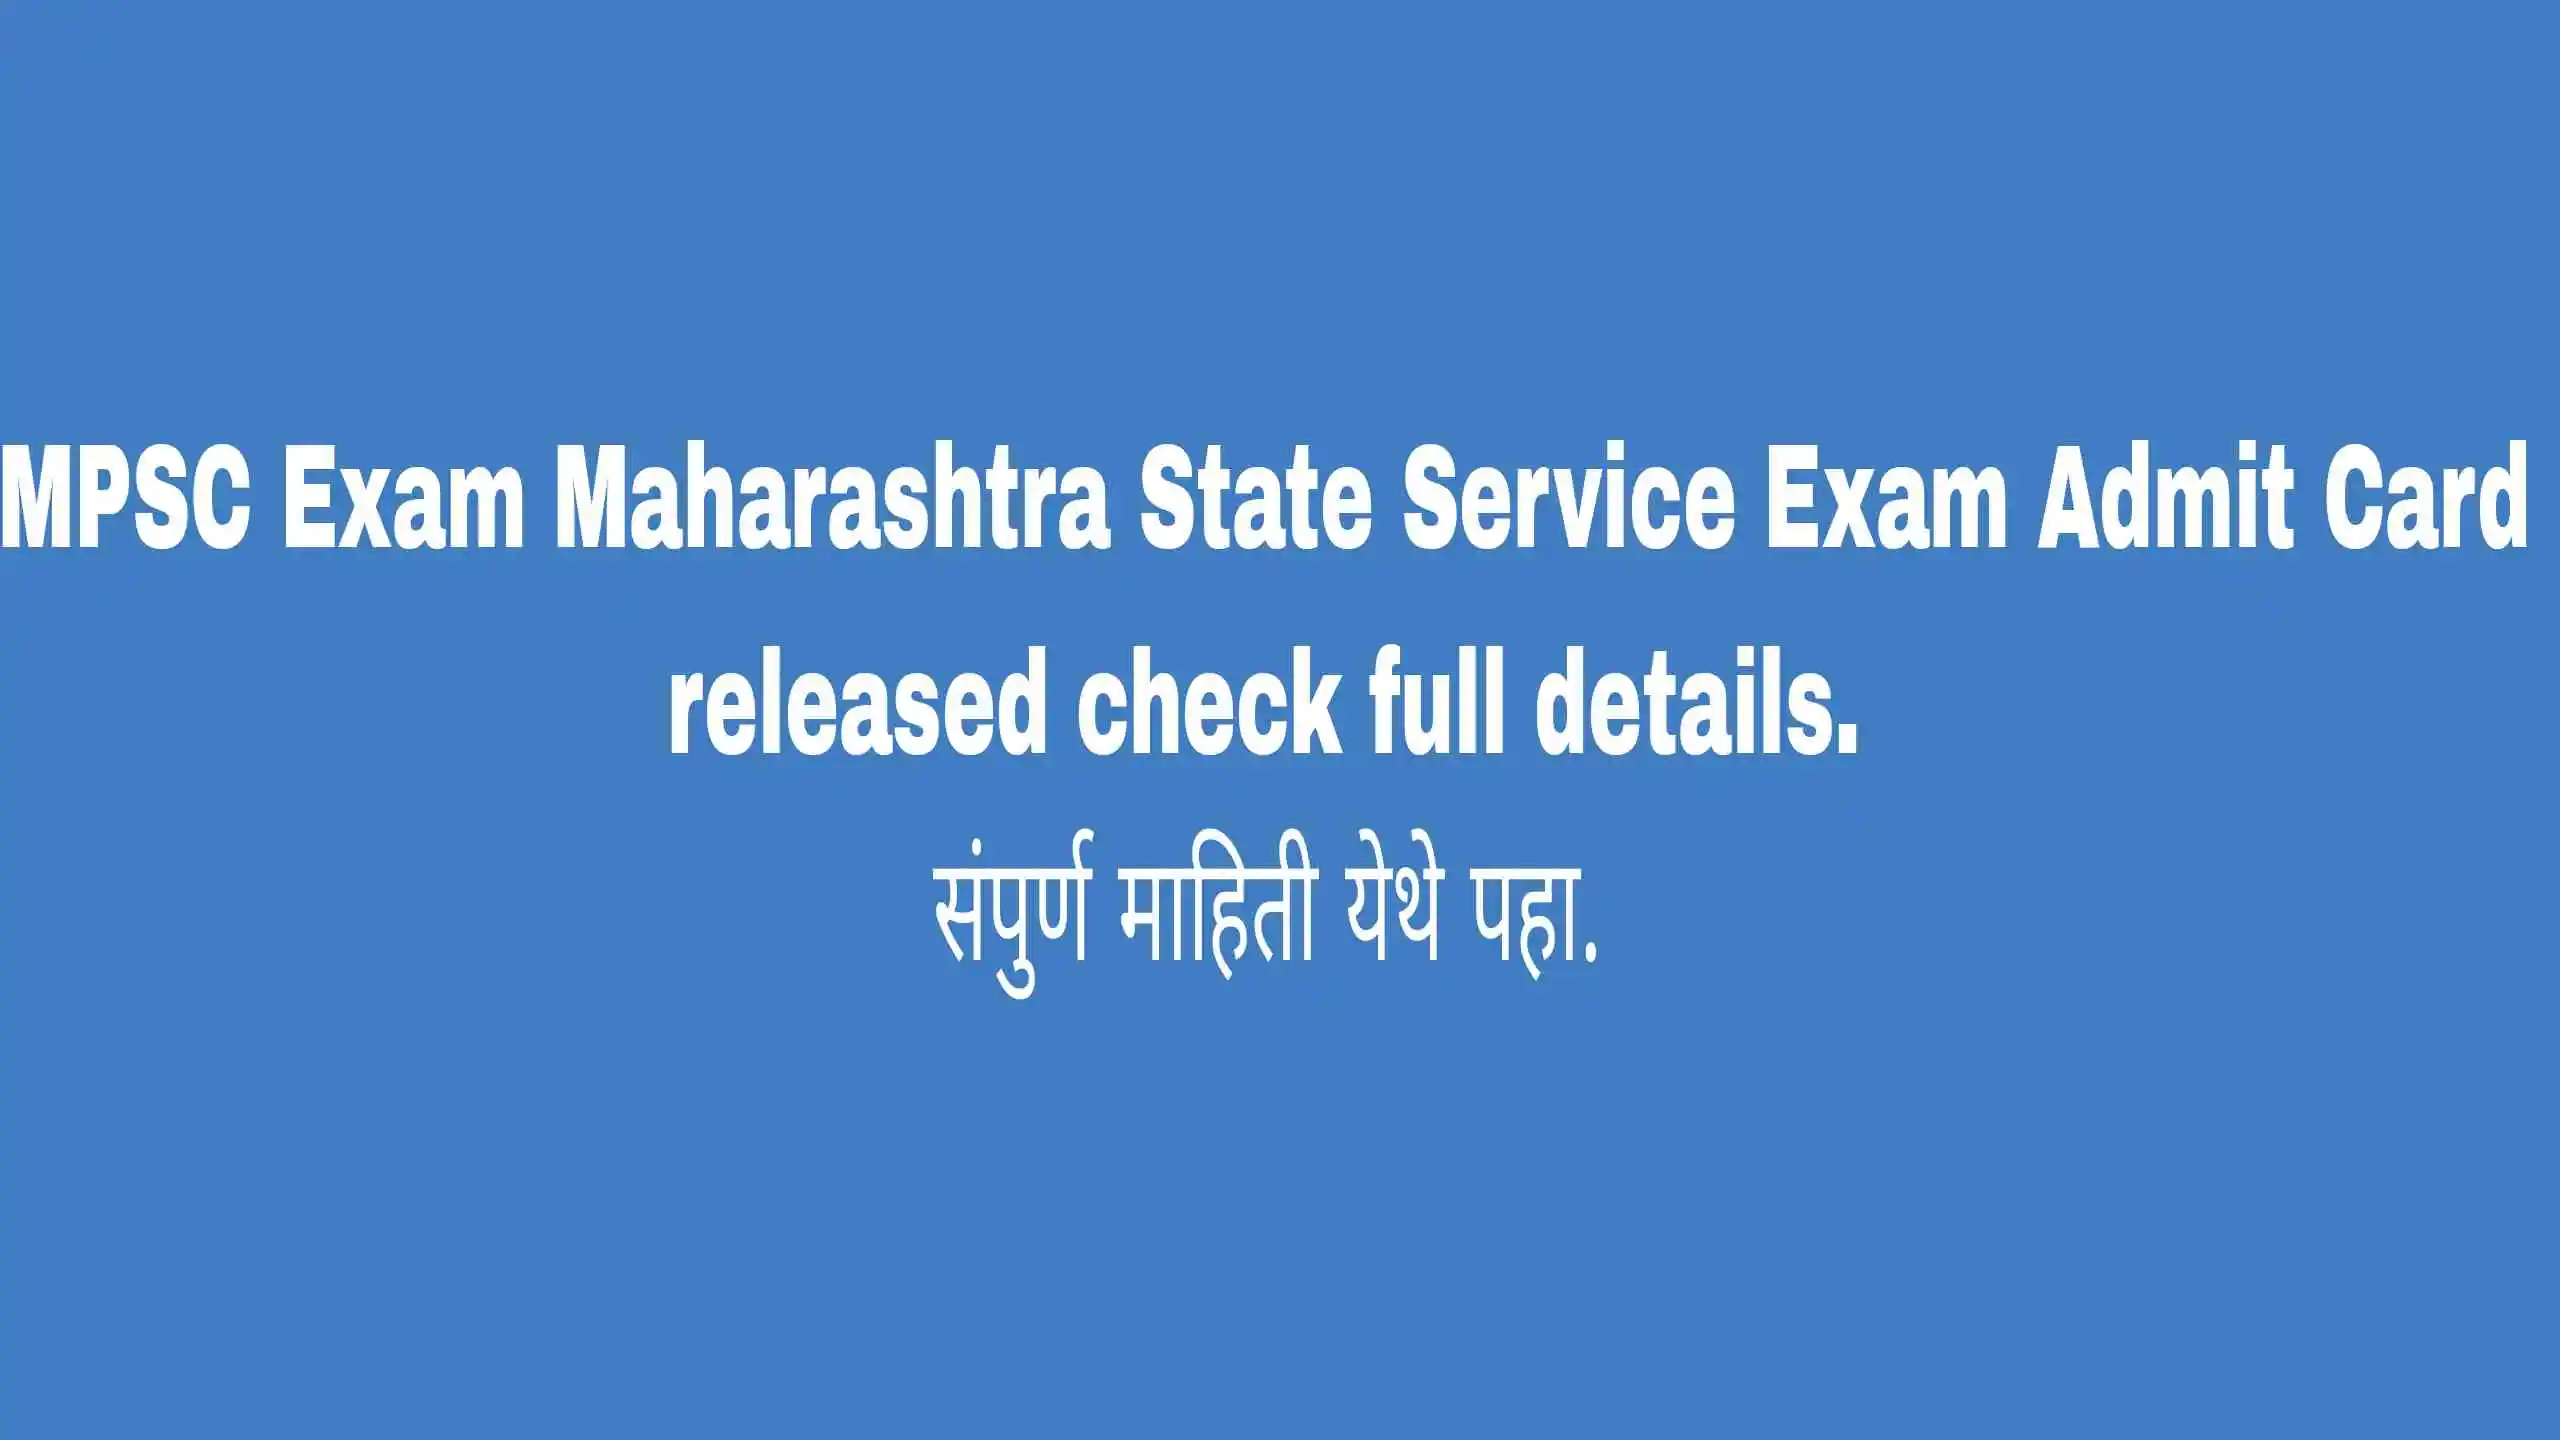 MPSC Exam Maharashtra State Service Exam Admit Card released check full details.